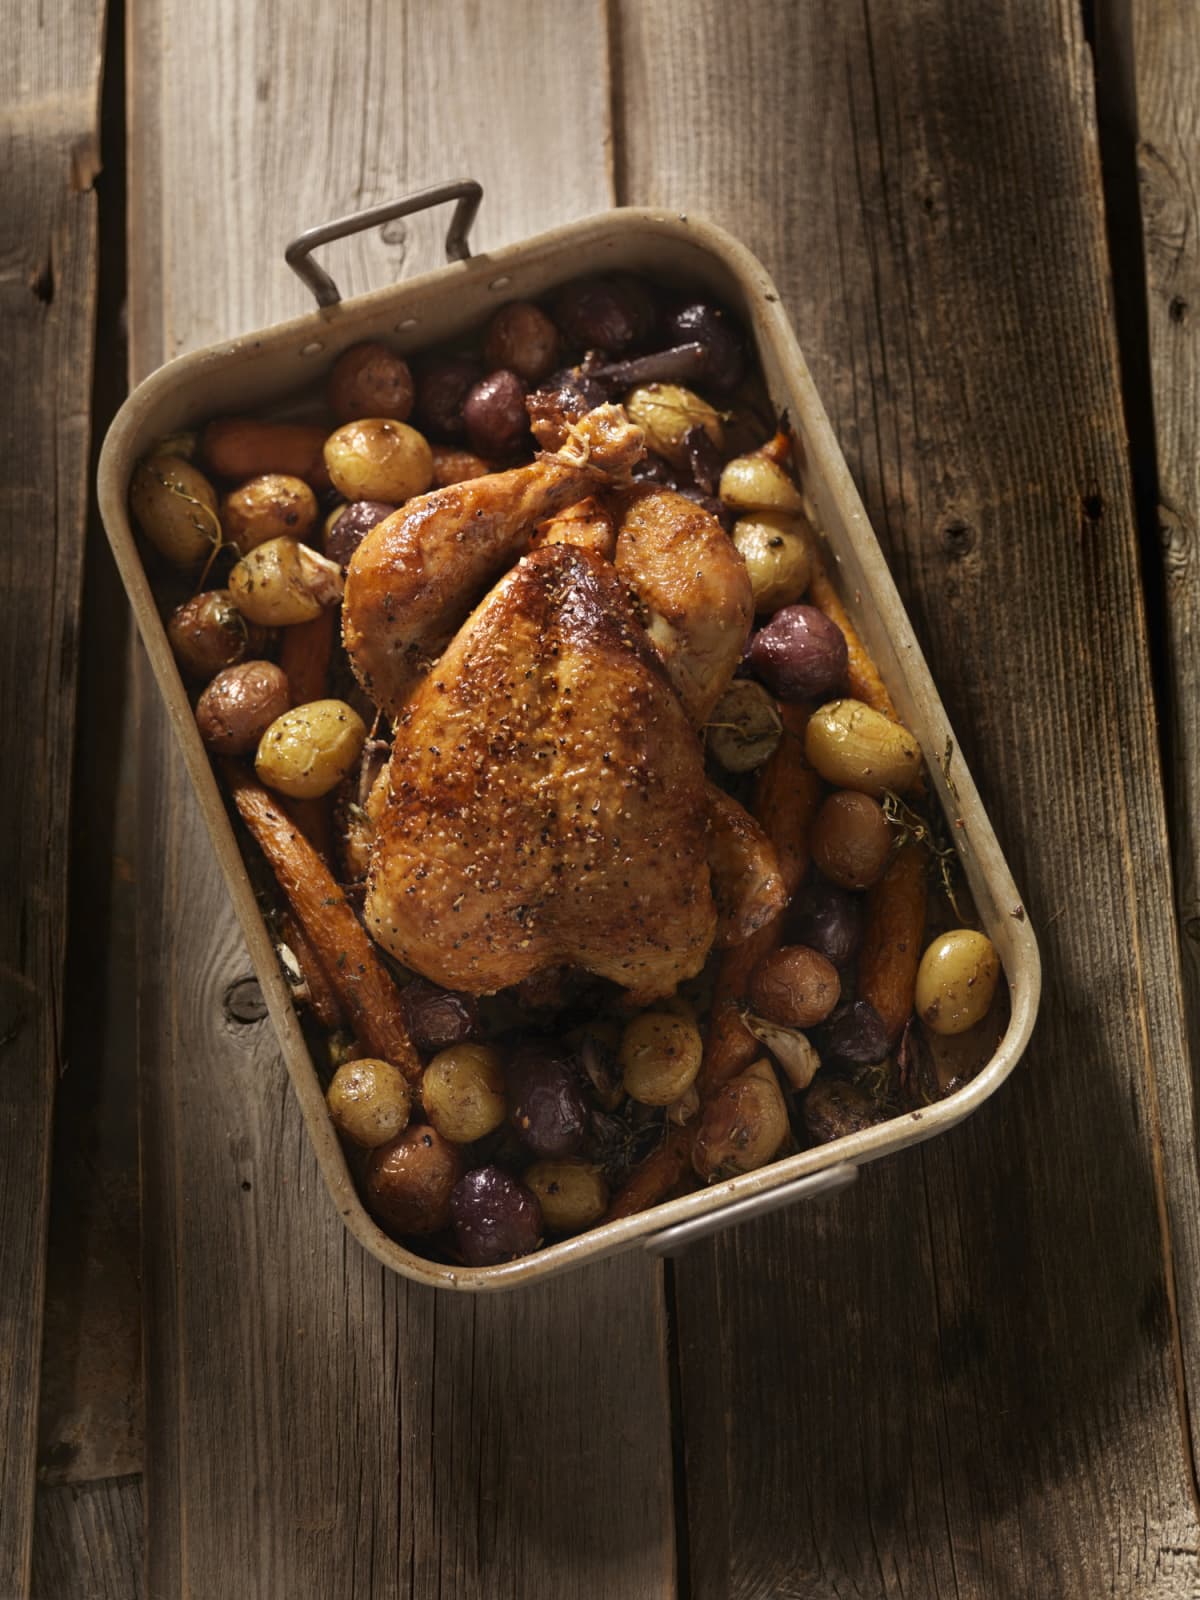 Roasted chicken with carrots and potatoes on a baking pan